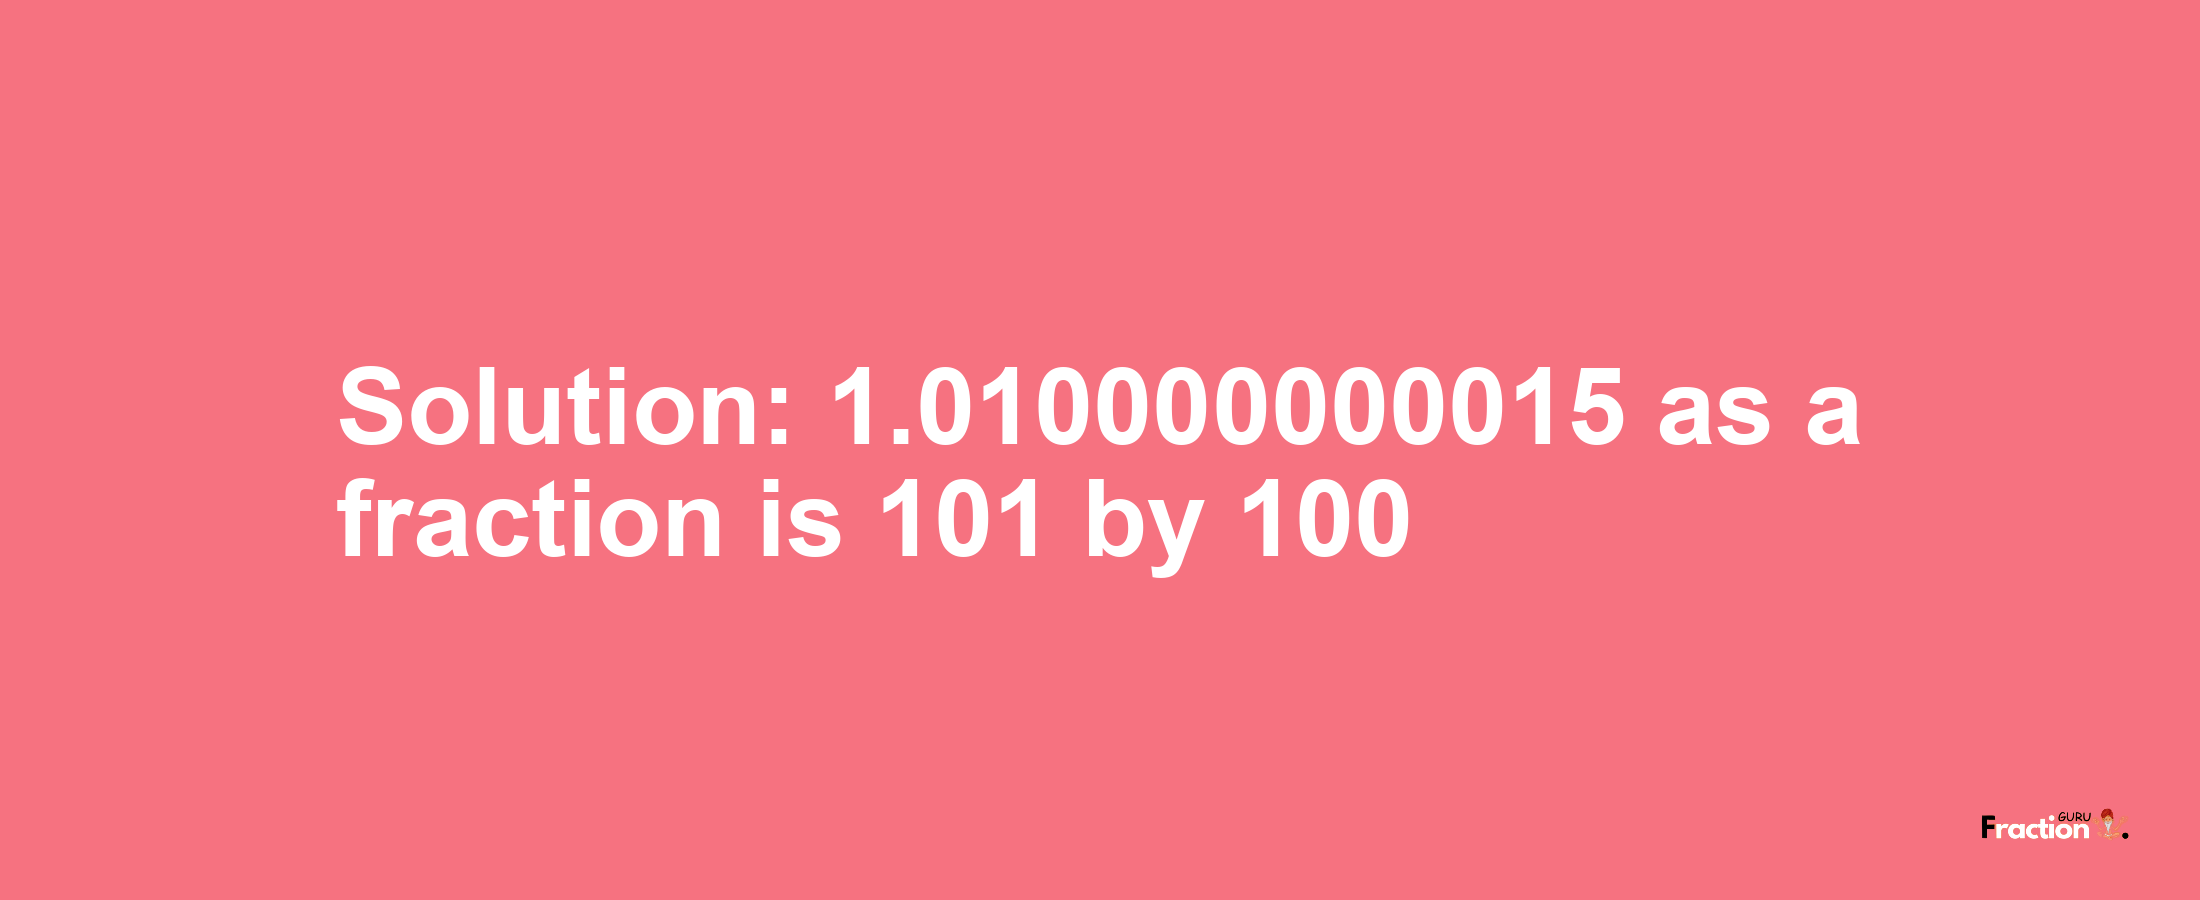 Solution:1.010000000015 as a fraction is 101/100